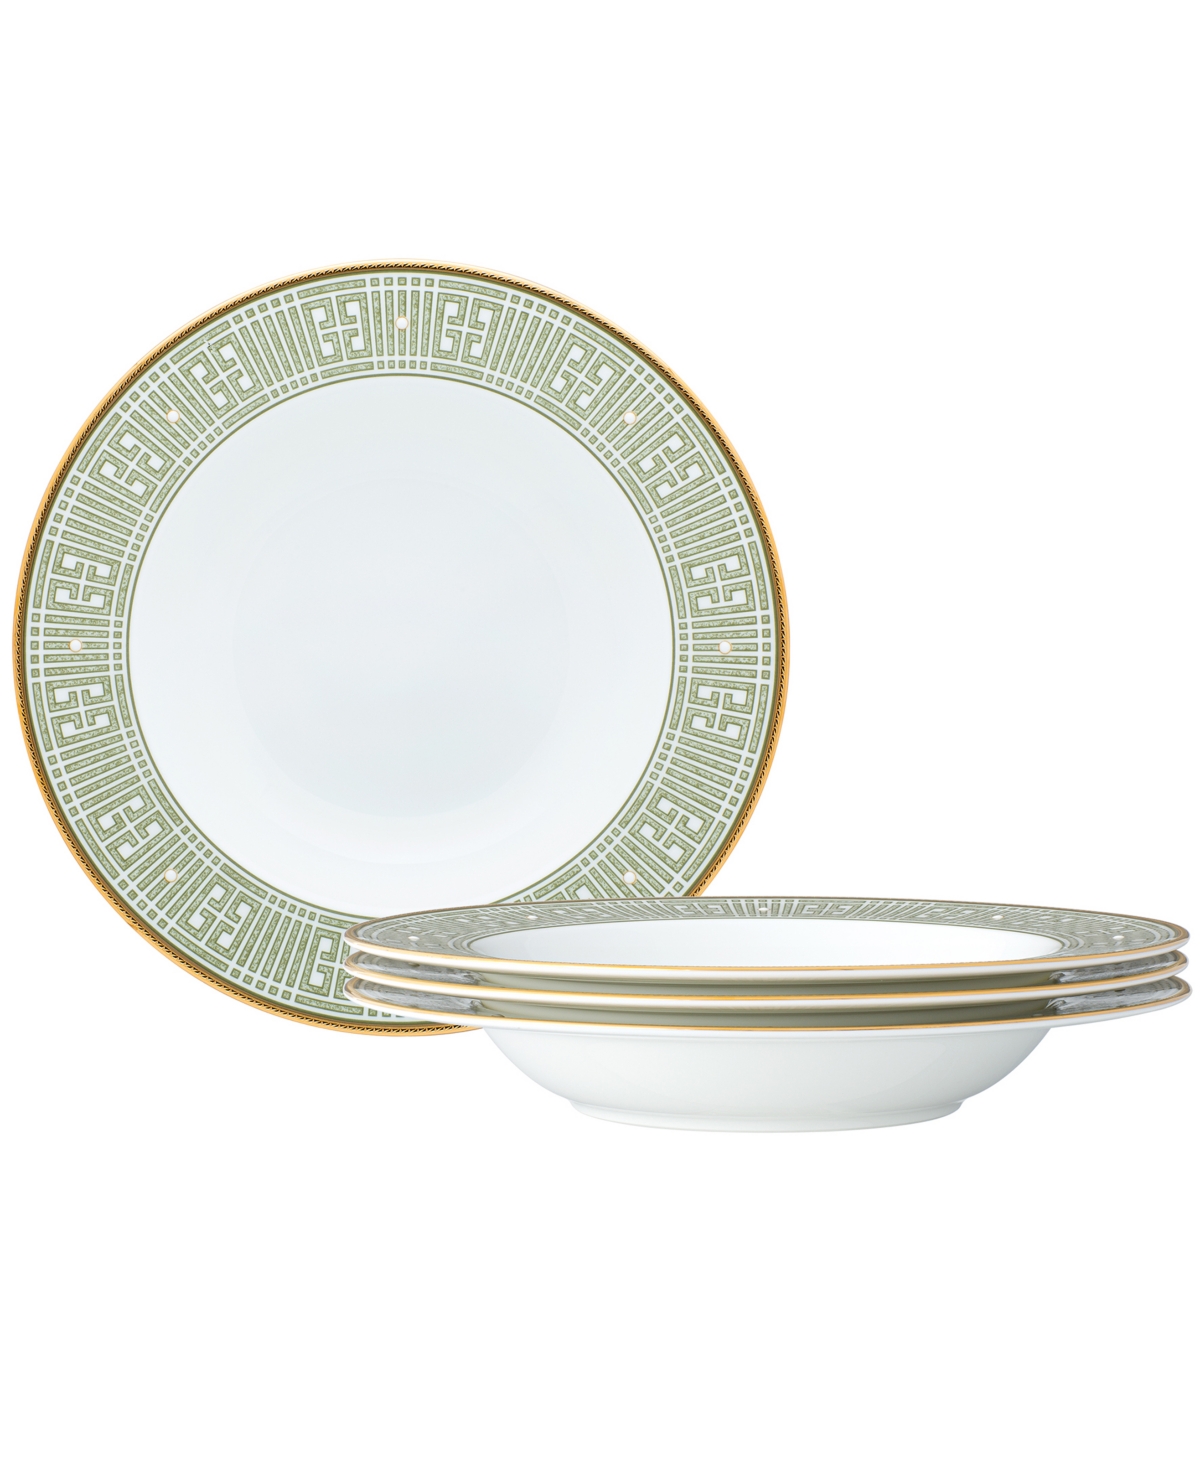 Noritake Infinity 4 Piece Soup Bowl Set 12 Oz, Service For 4 In Green Gold